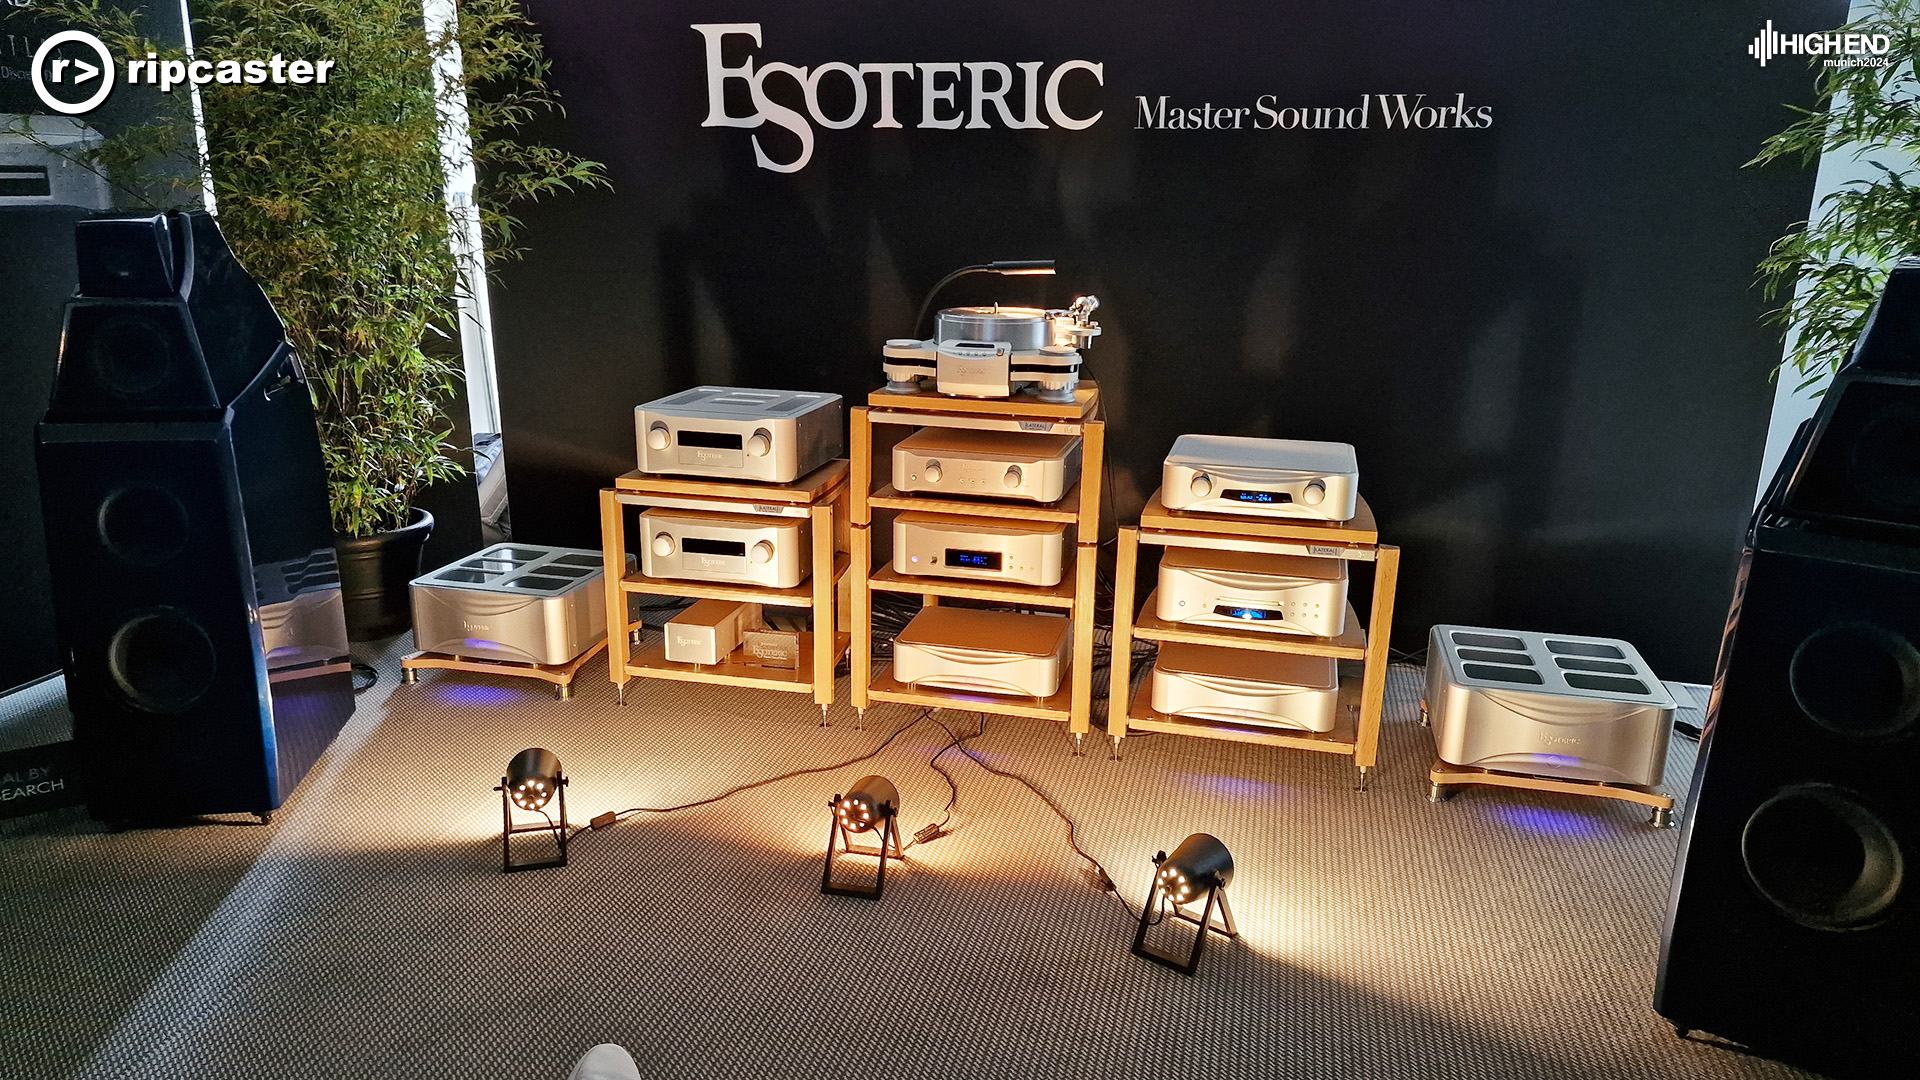 Esoteric.  Black floorstanding speakers with other HiFi equipment on stands